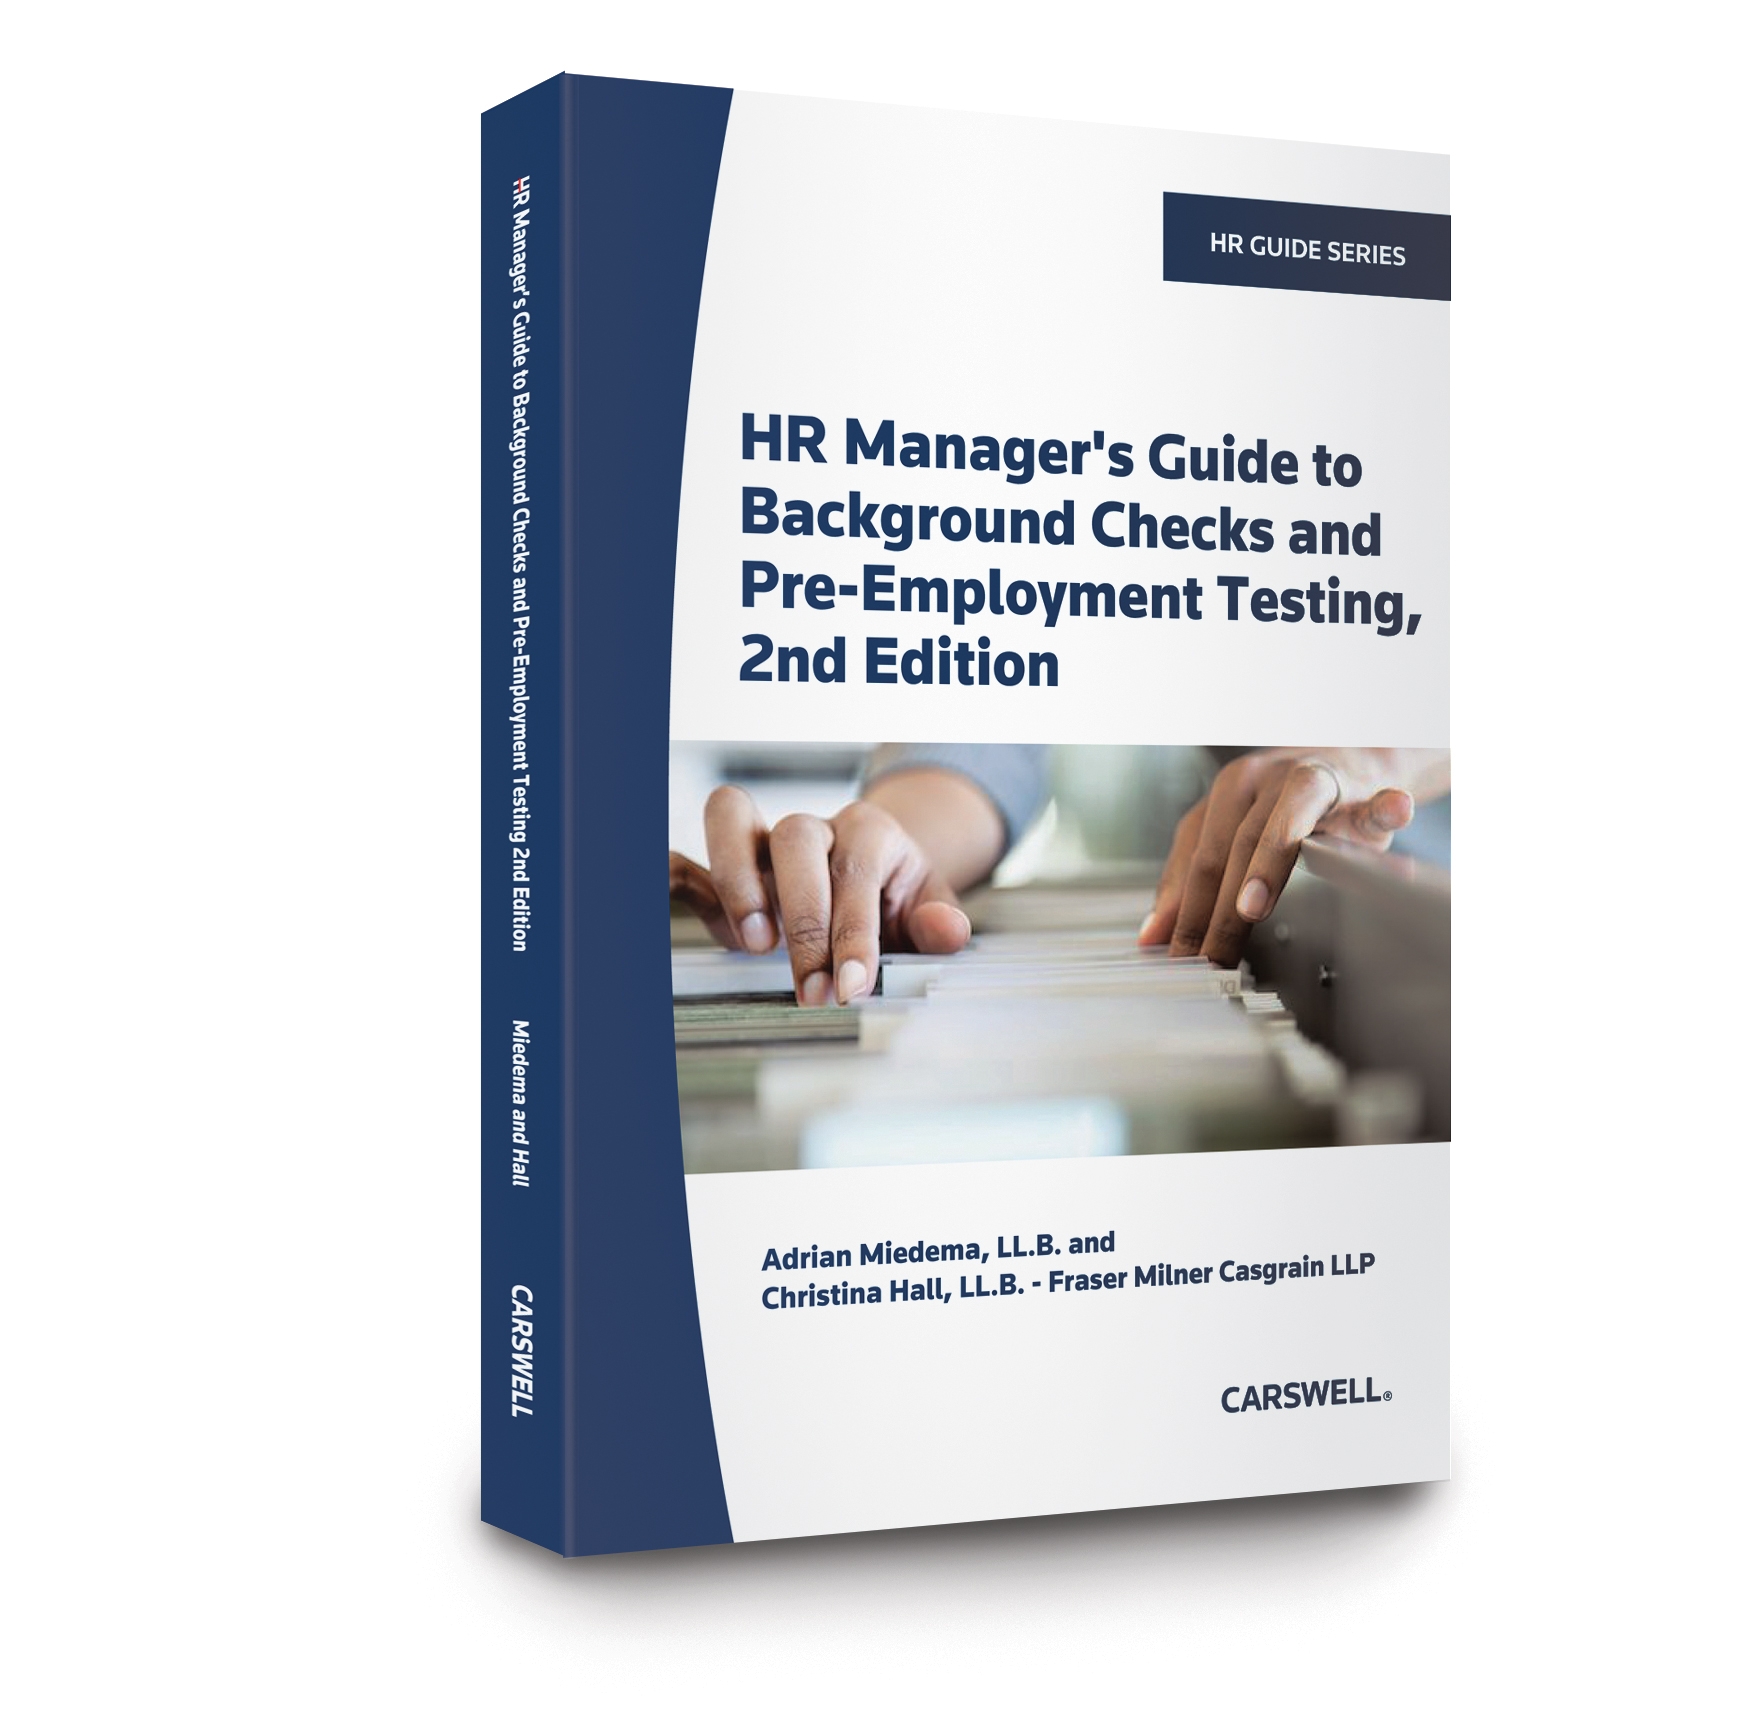 HR managers guide booklet image